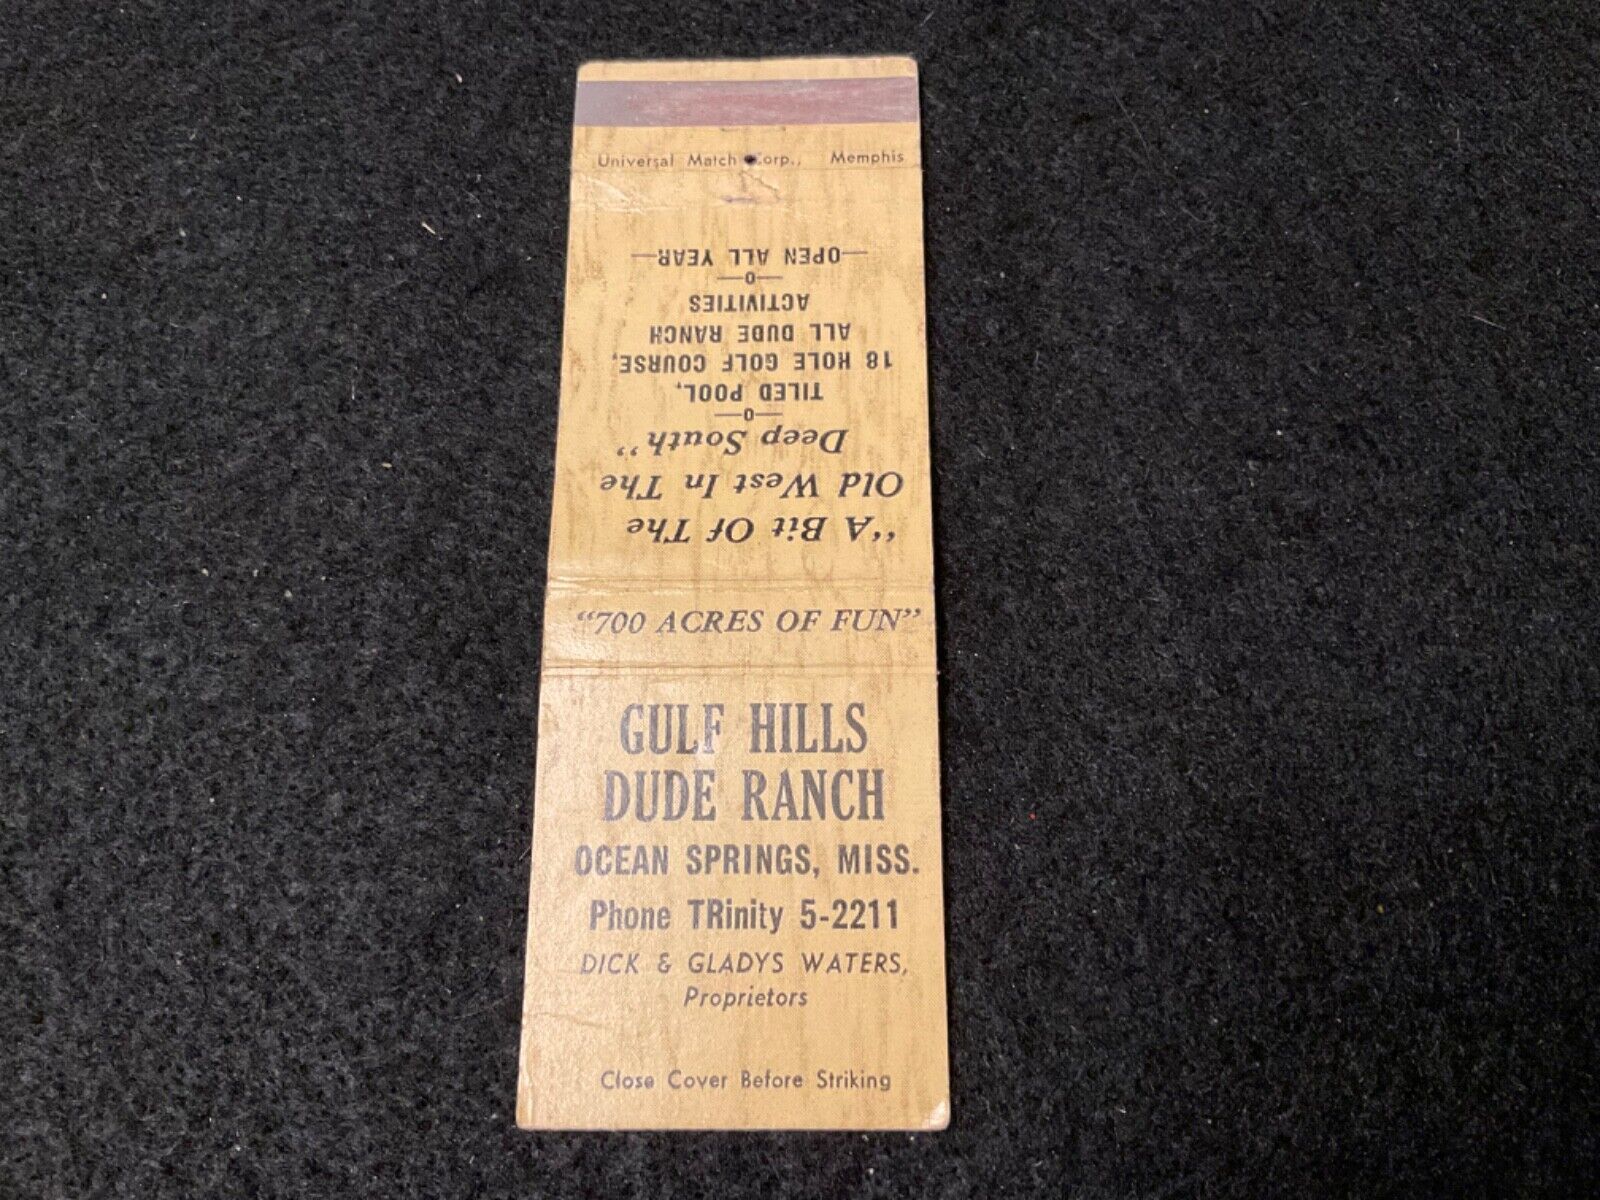 GULF HILLS DUDE RANCH OCEAN SPRINGS MISSISSIPPI Matchbook Cover Cowboy lodge